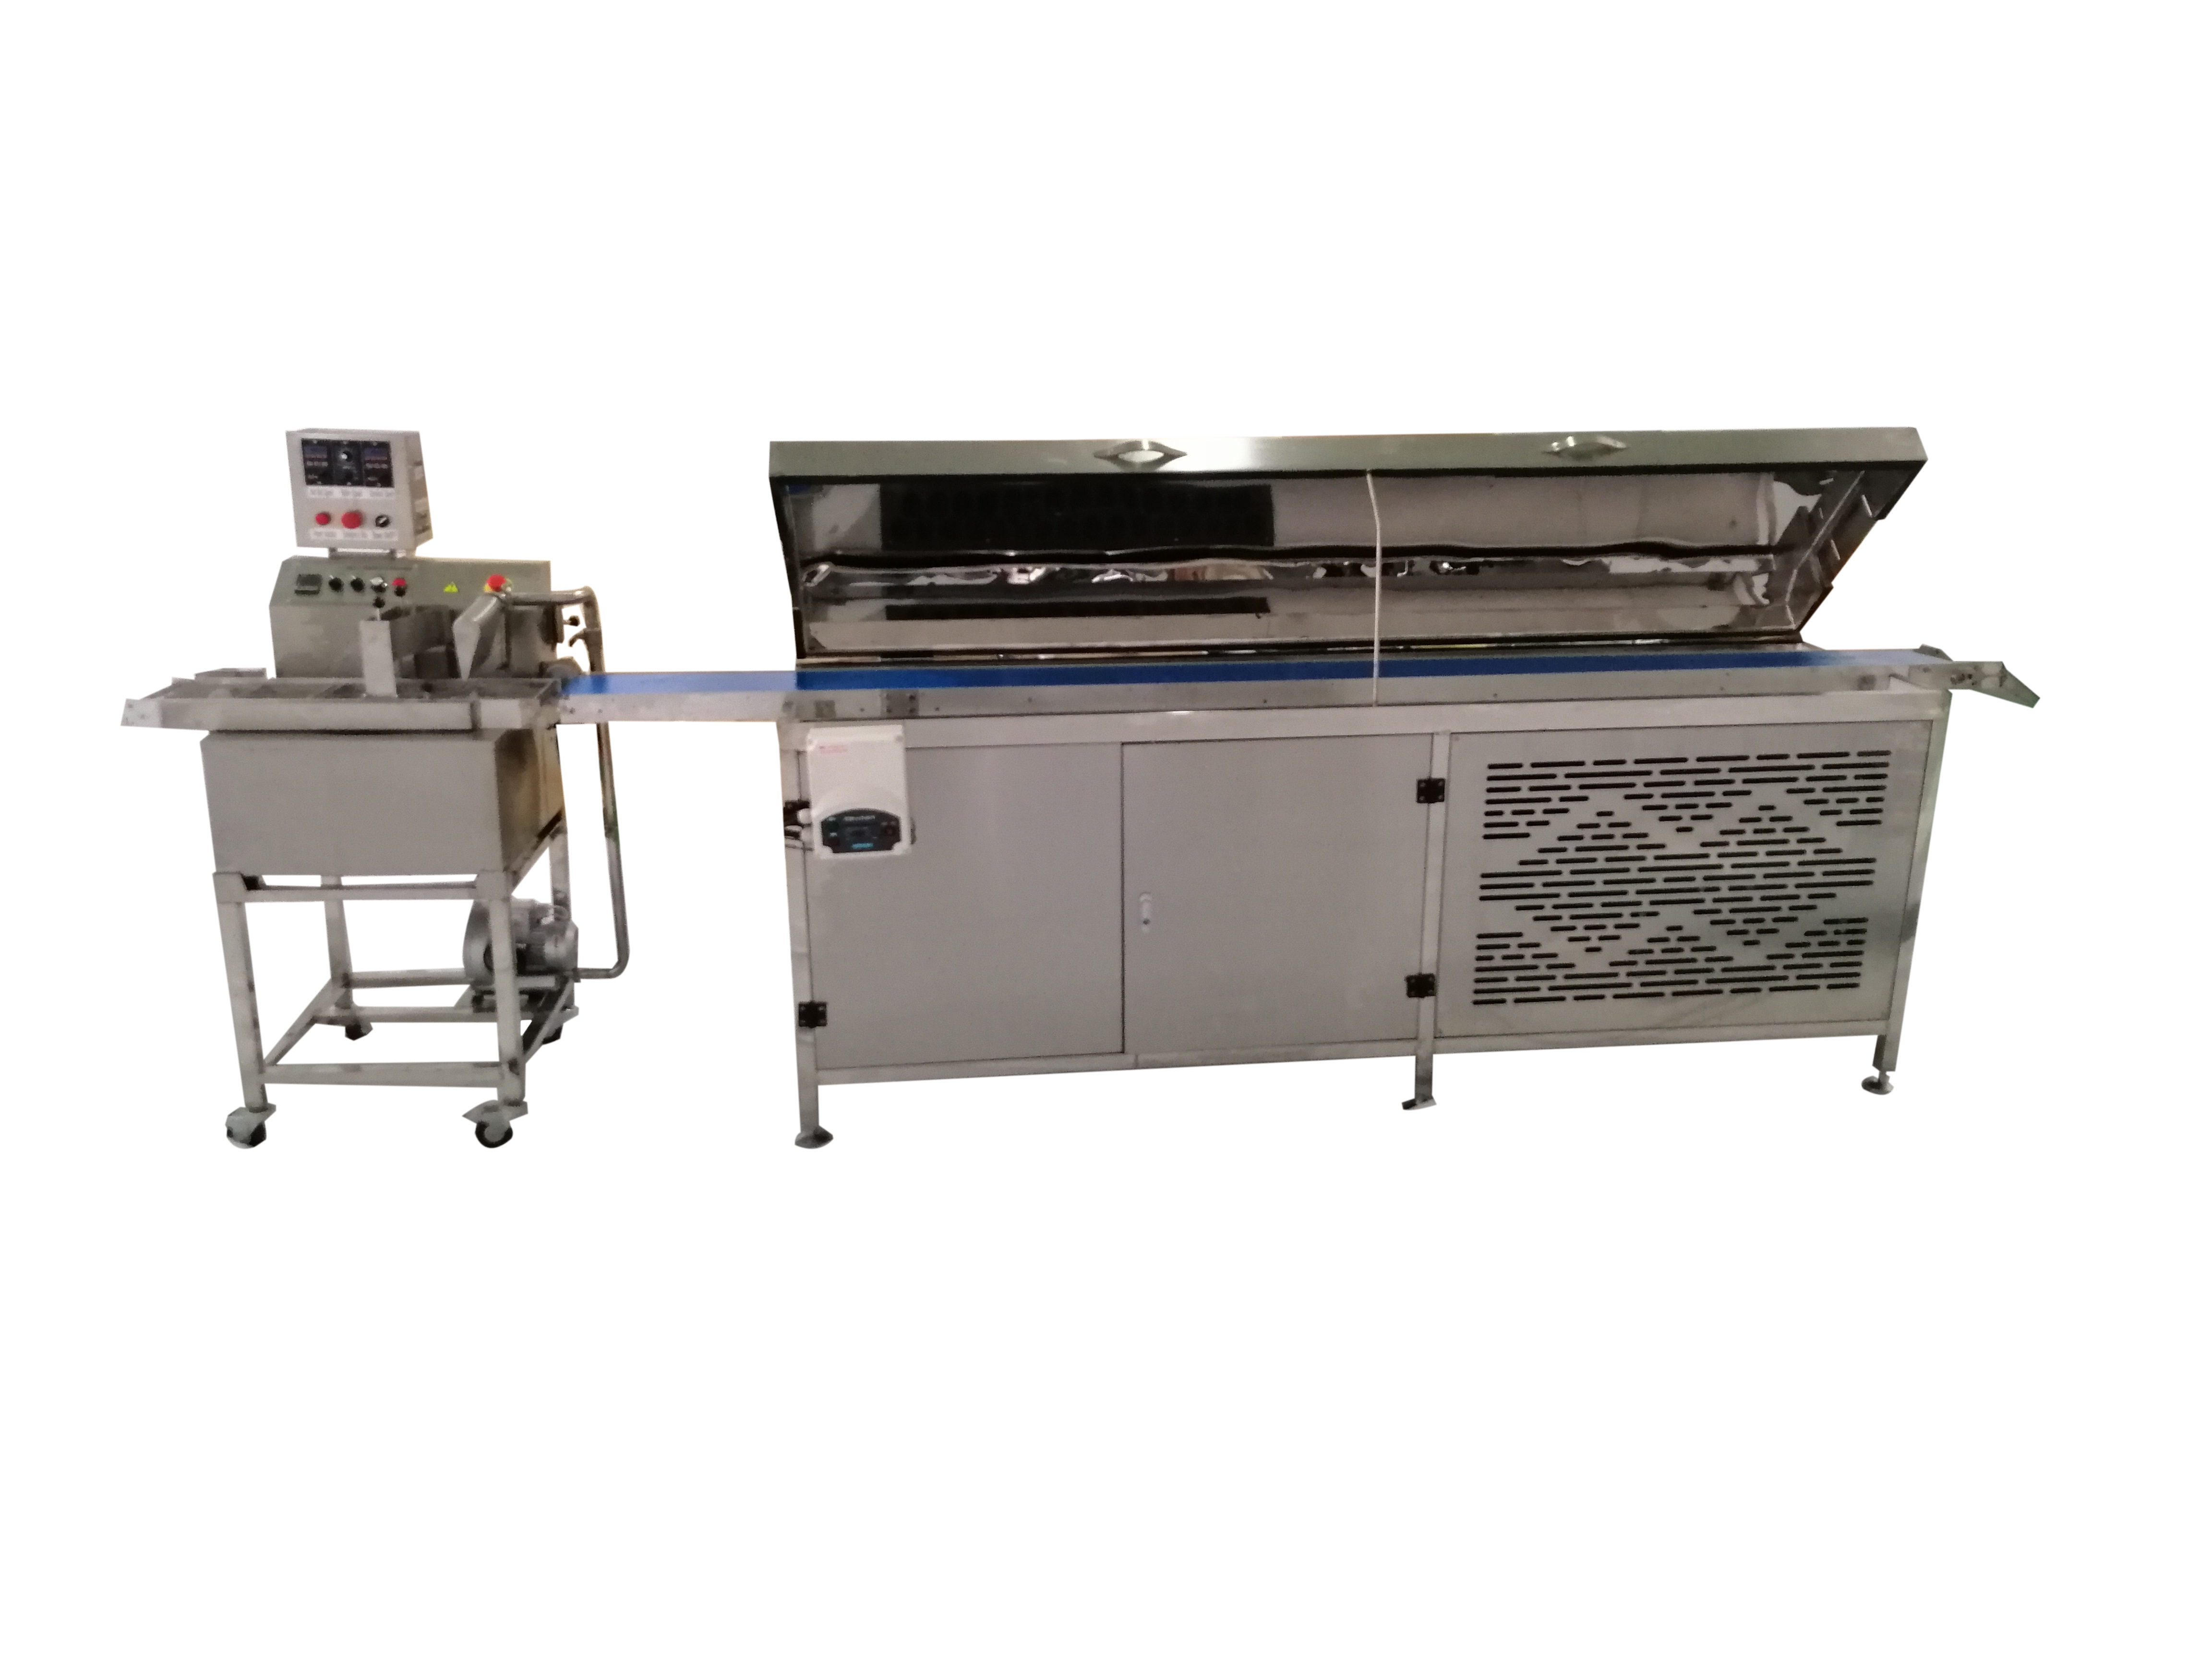 New trial-chocolate coating machine for energy balls, protein balls, fruit balls